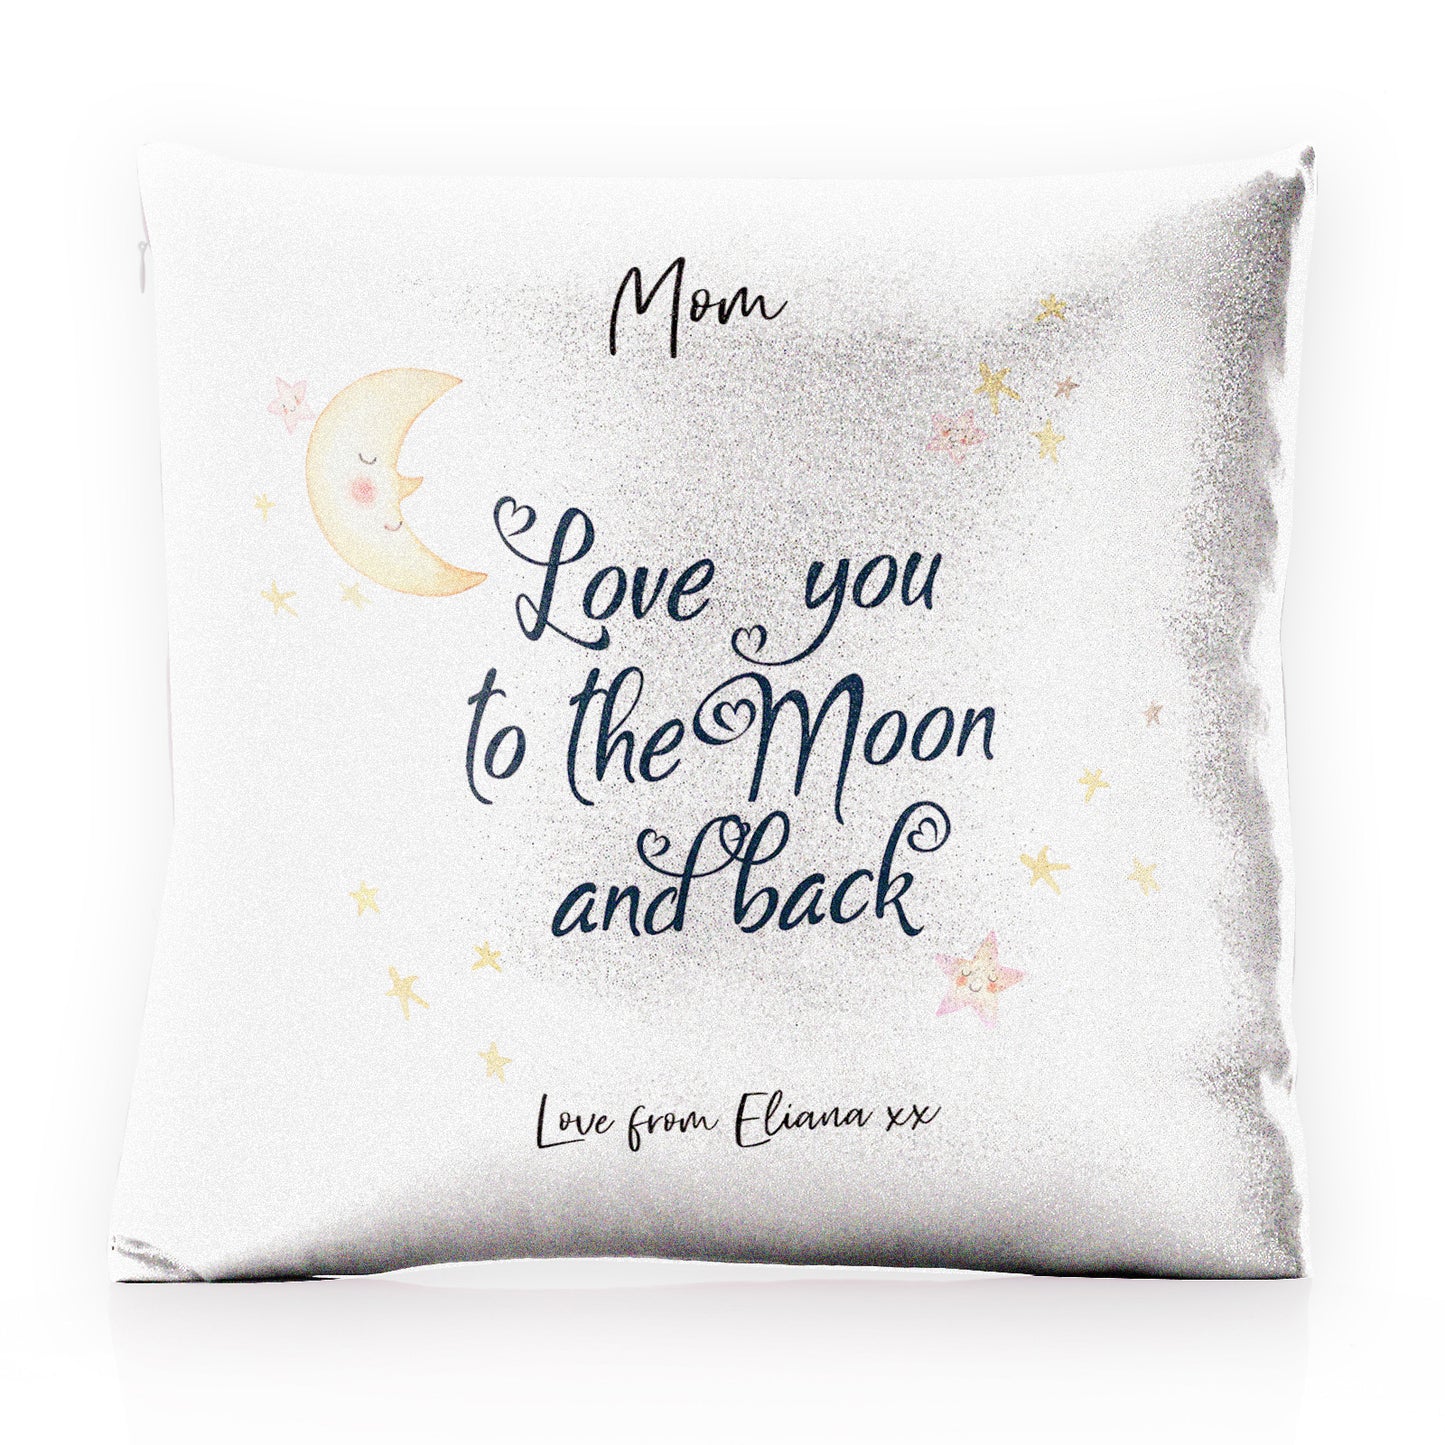 Personalised Glitter Cushion with Stylish Text and Moon Love Message